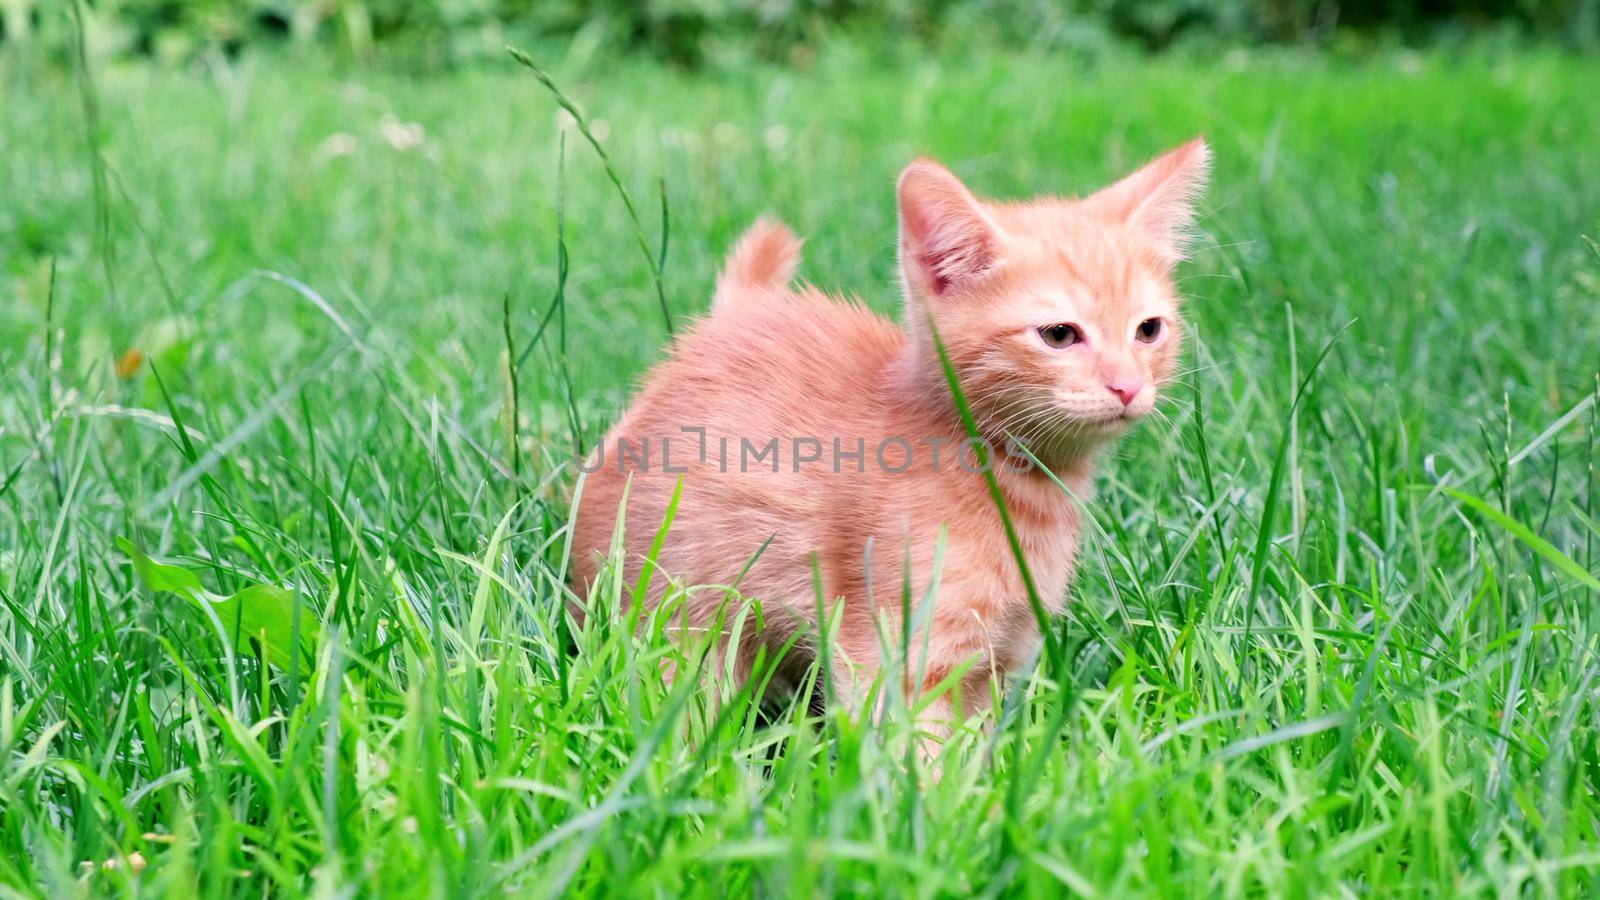 Funny playful red ginger curious tabby kitten walks on grass outdoors in the garden and looks around. Pet care, healthy eating concept by chelmicky